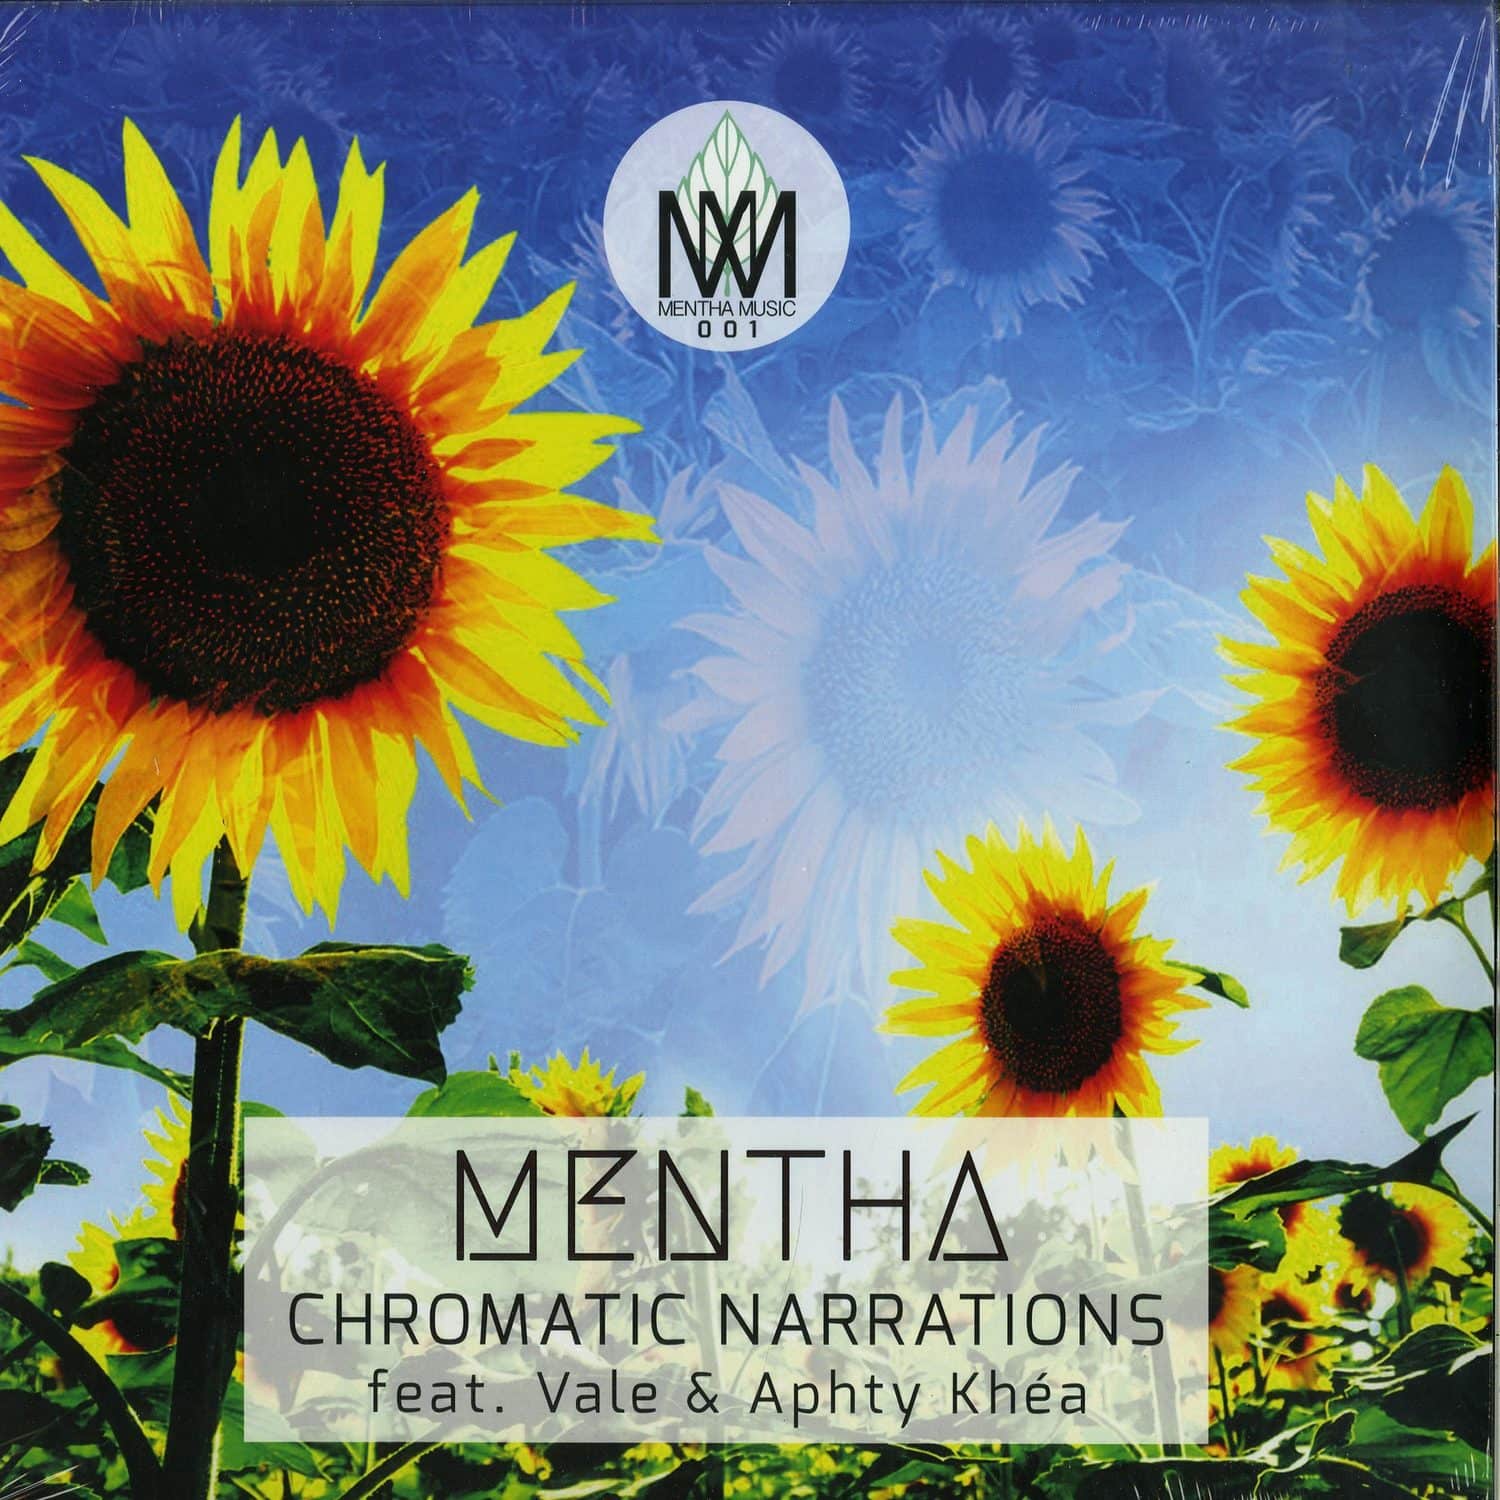 Mentha - CHROMATIC NARRATIONS FT. VALE & APHTY KH